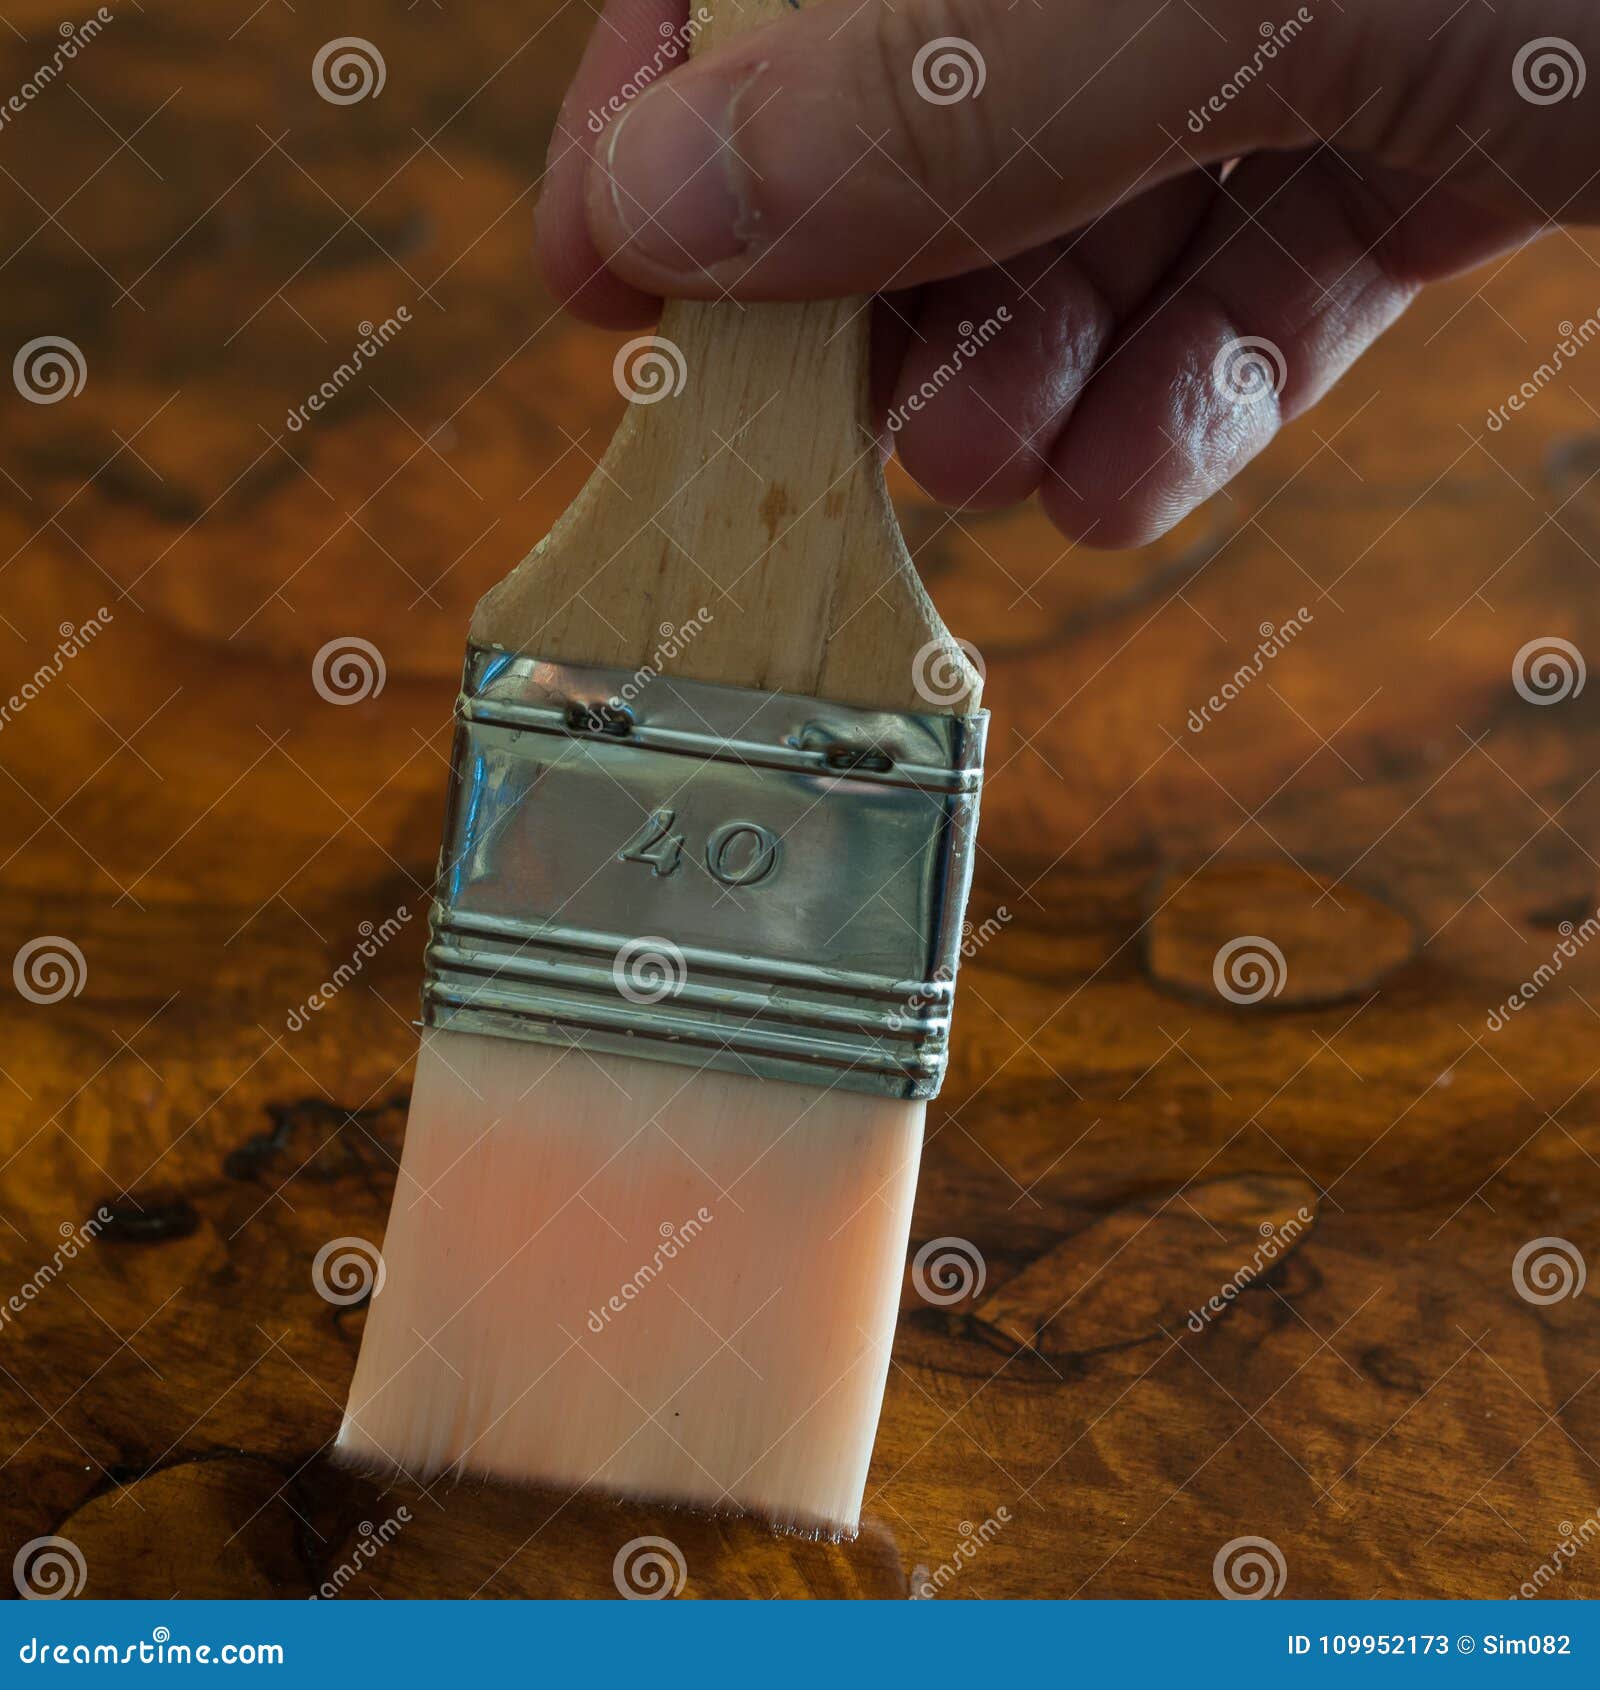 furniture restoration. hand oiling a wood table with a brush.